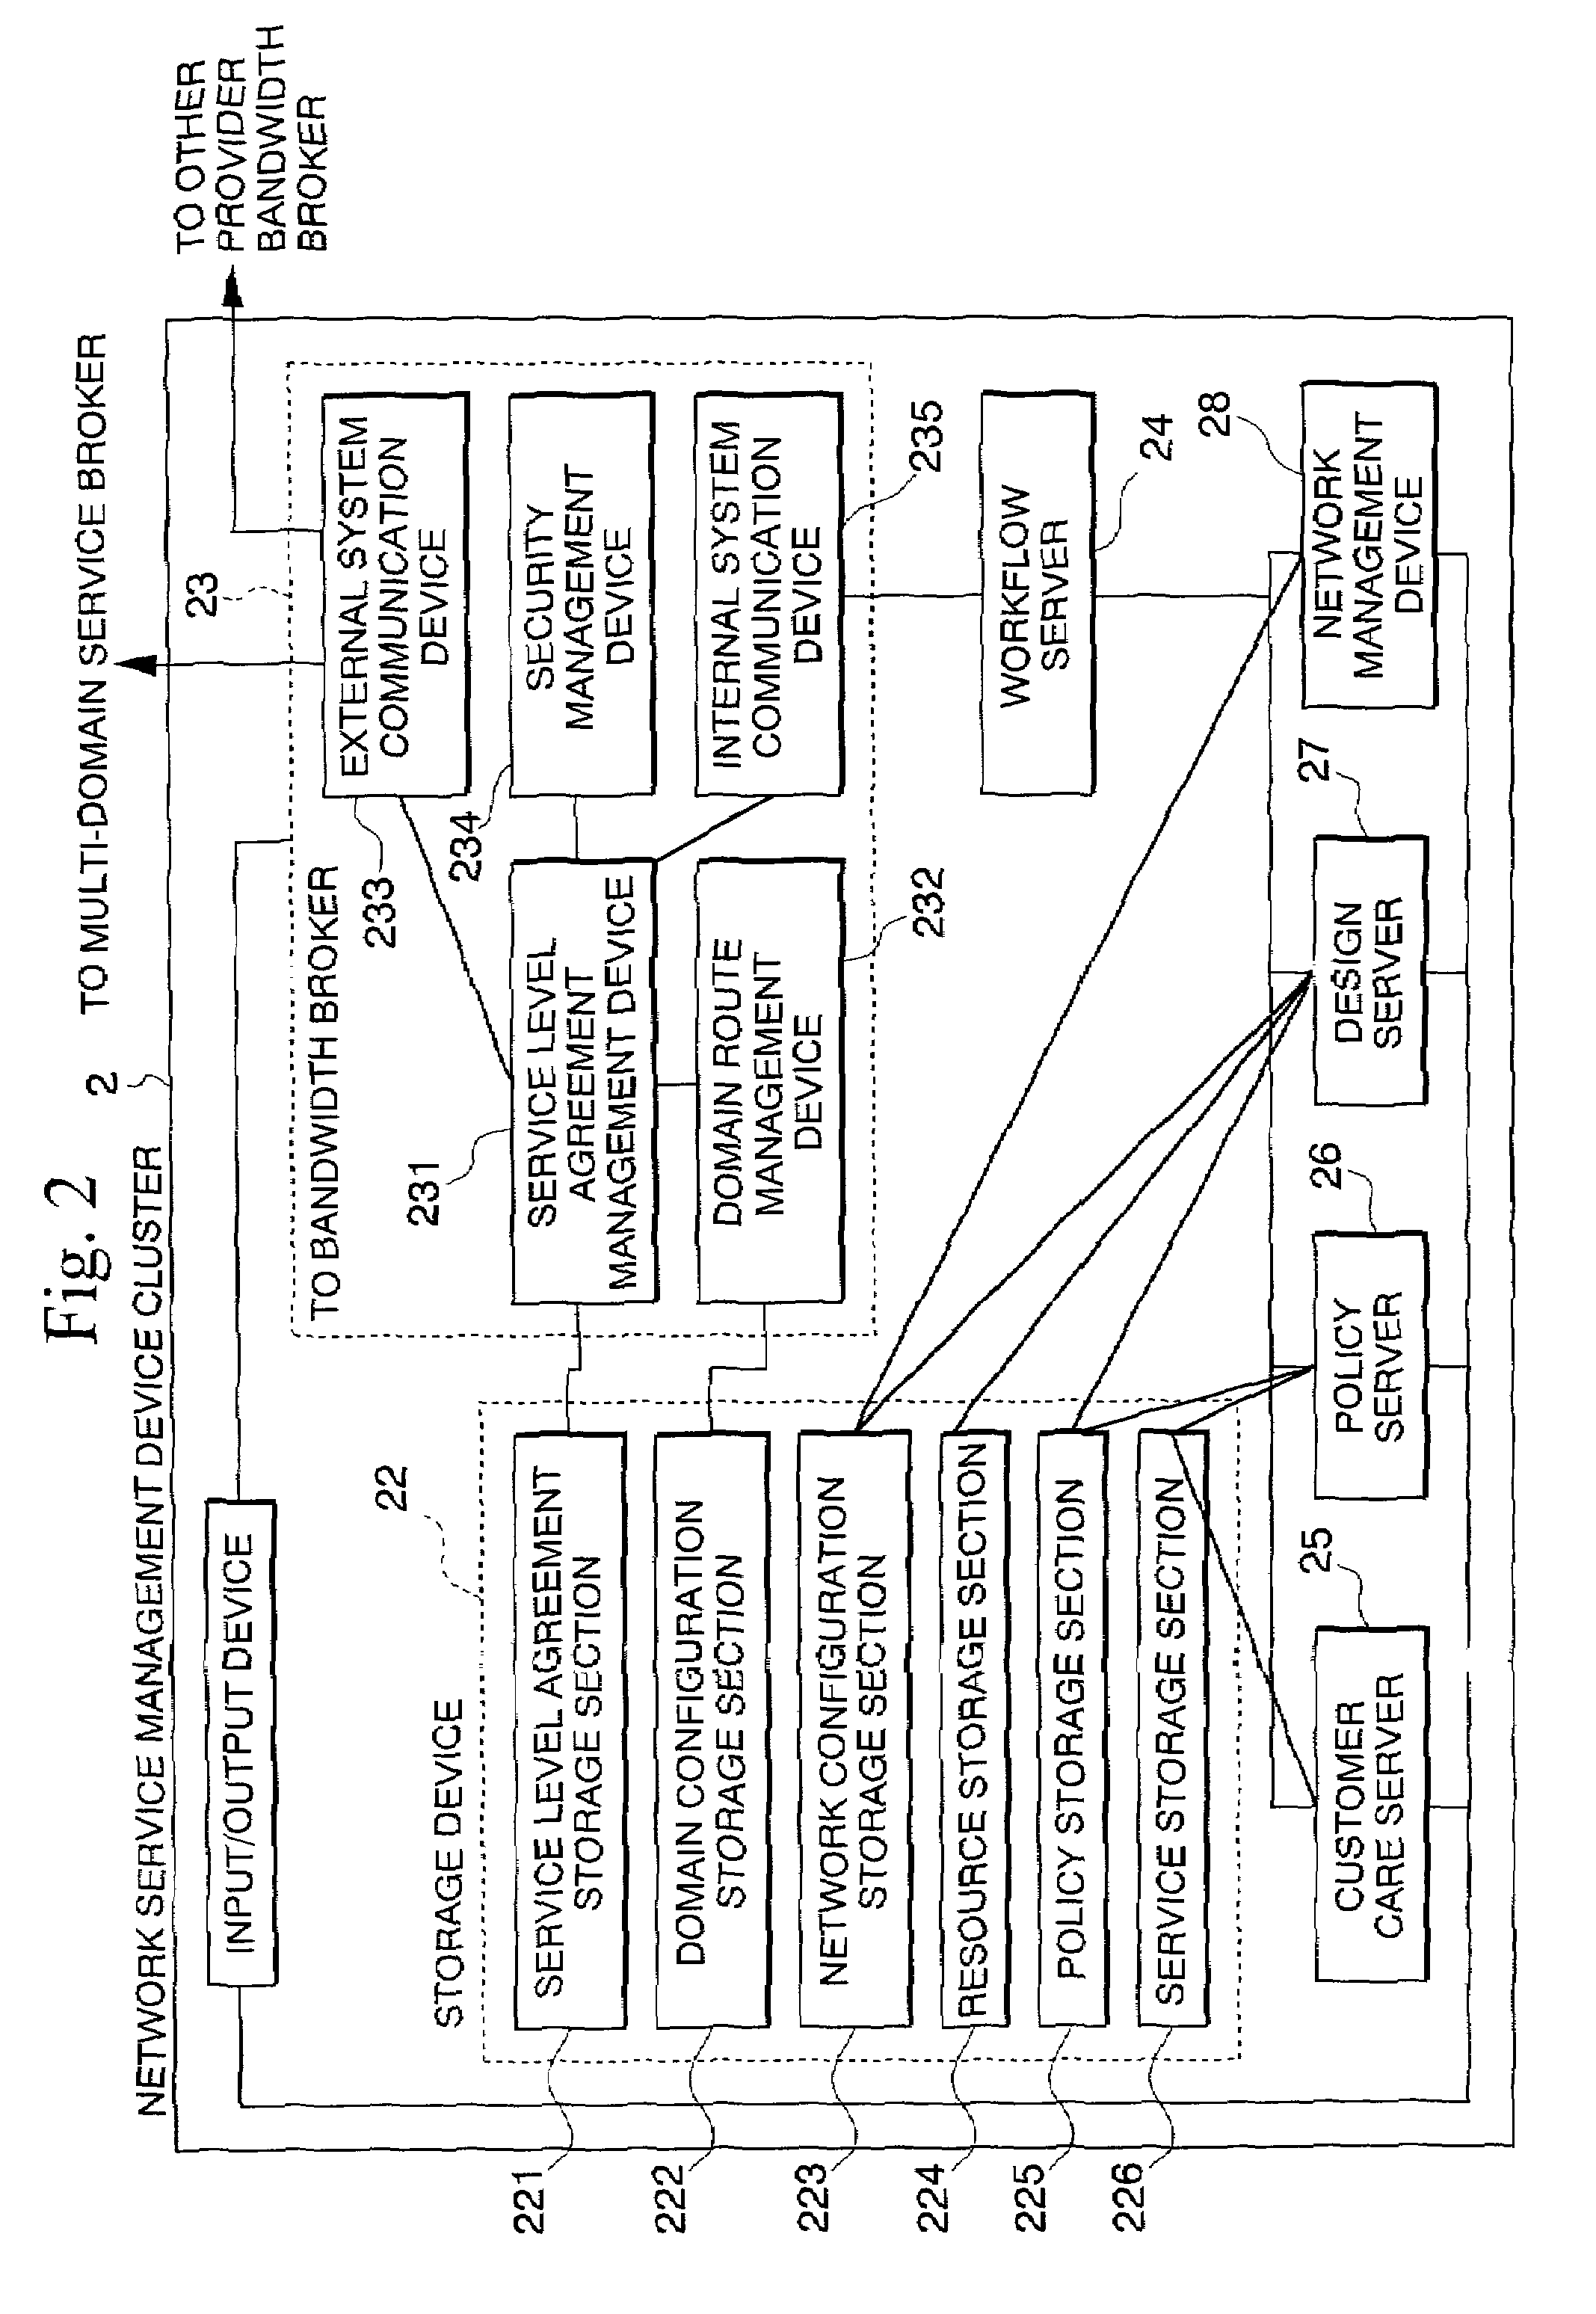 Quality assured network service provision system compatible with a multi-domain network and service provision method and service broker device